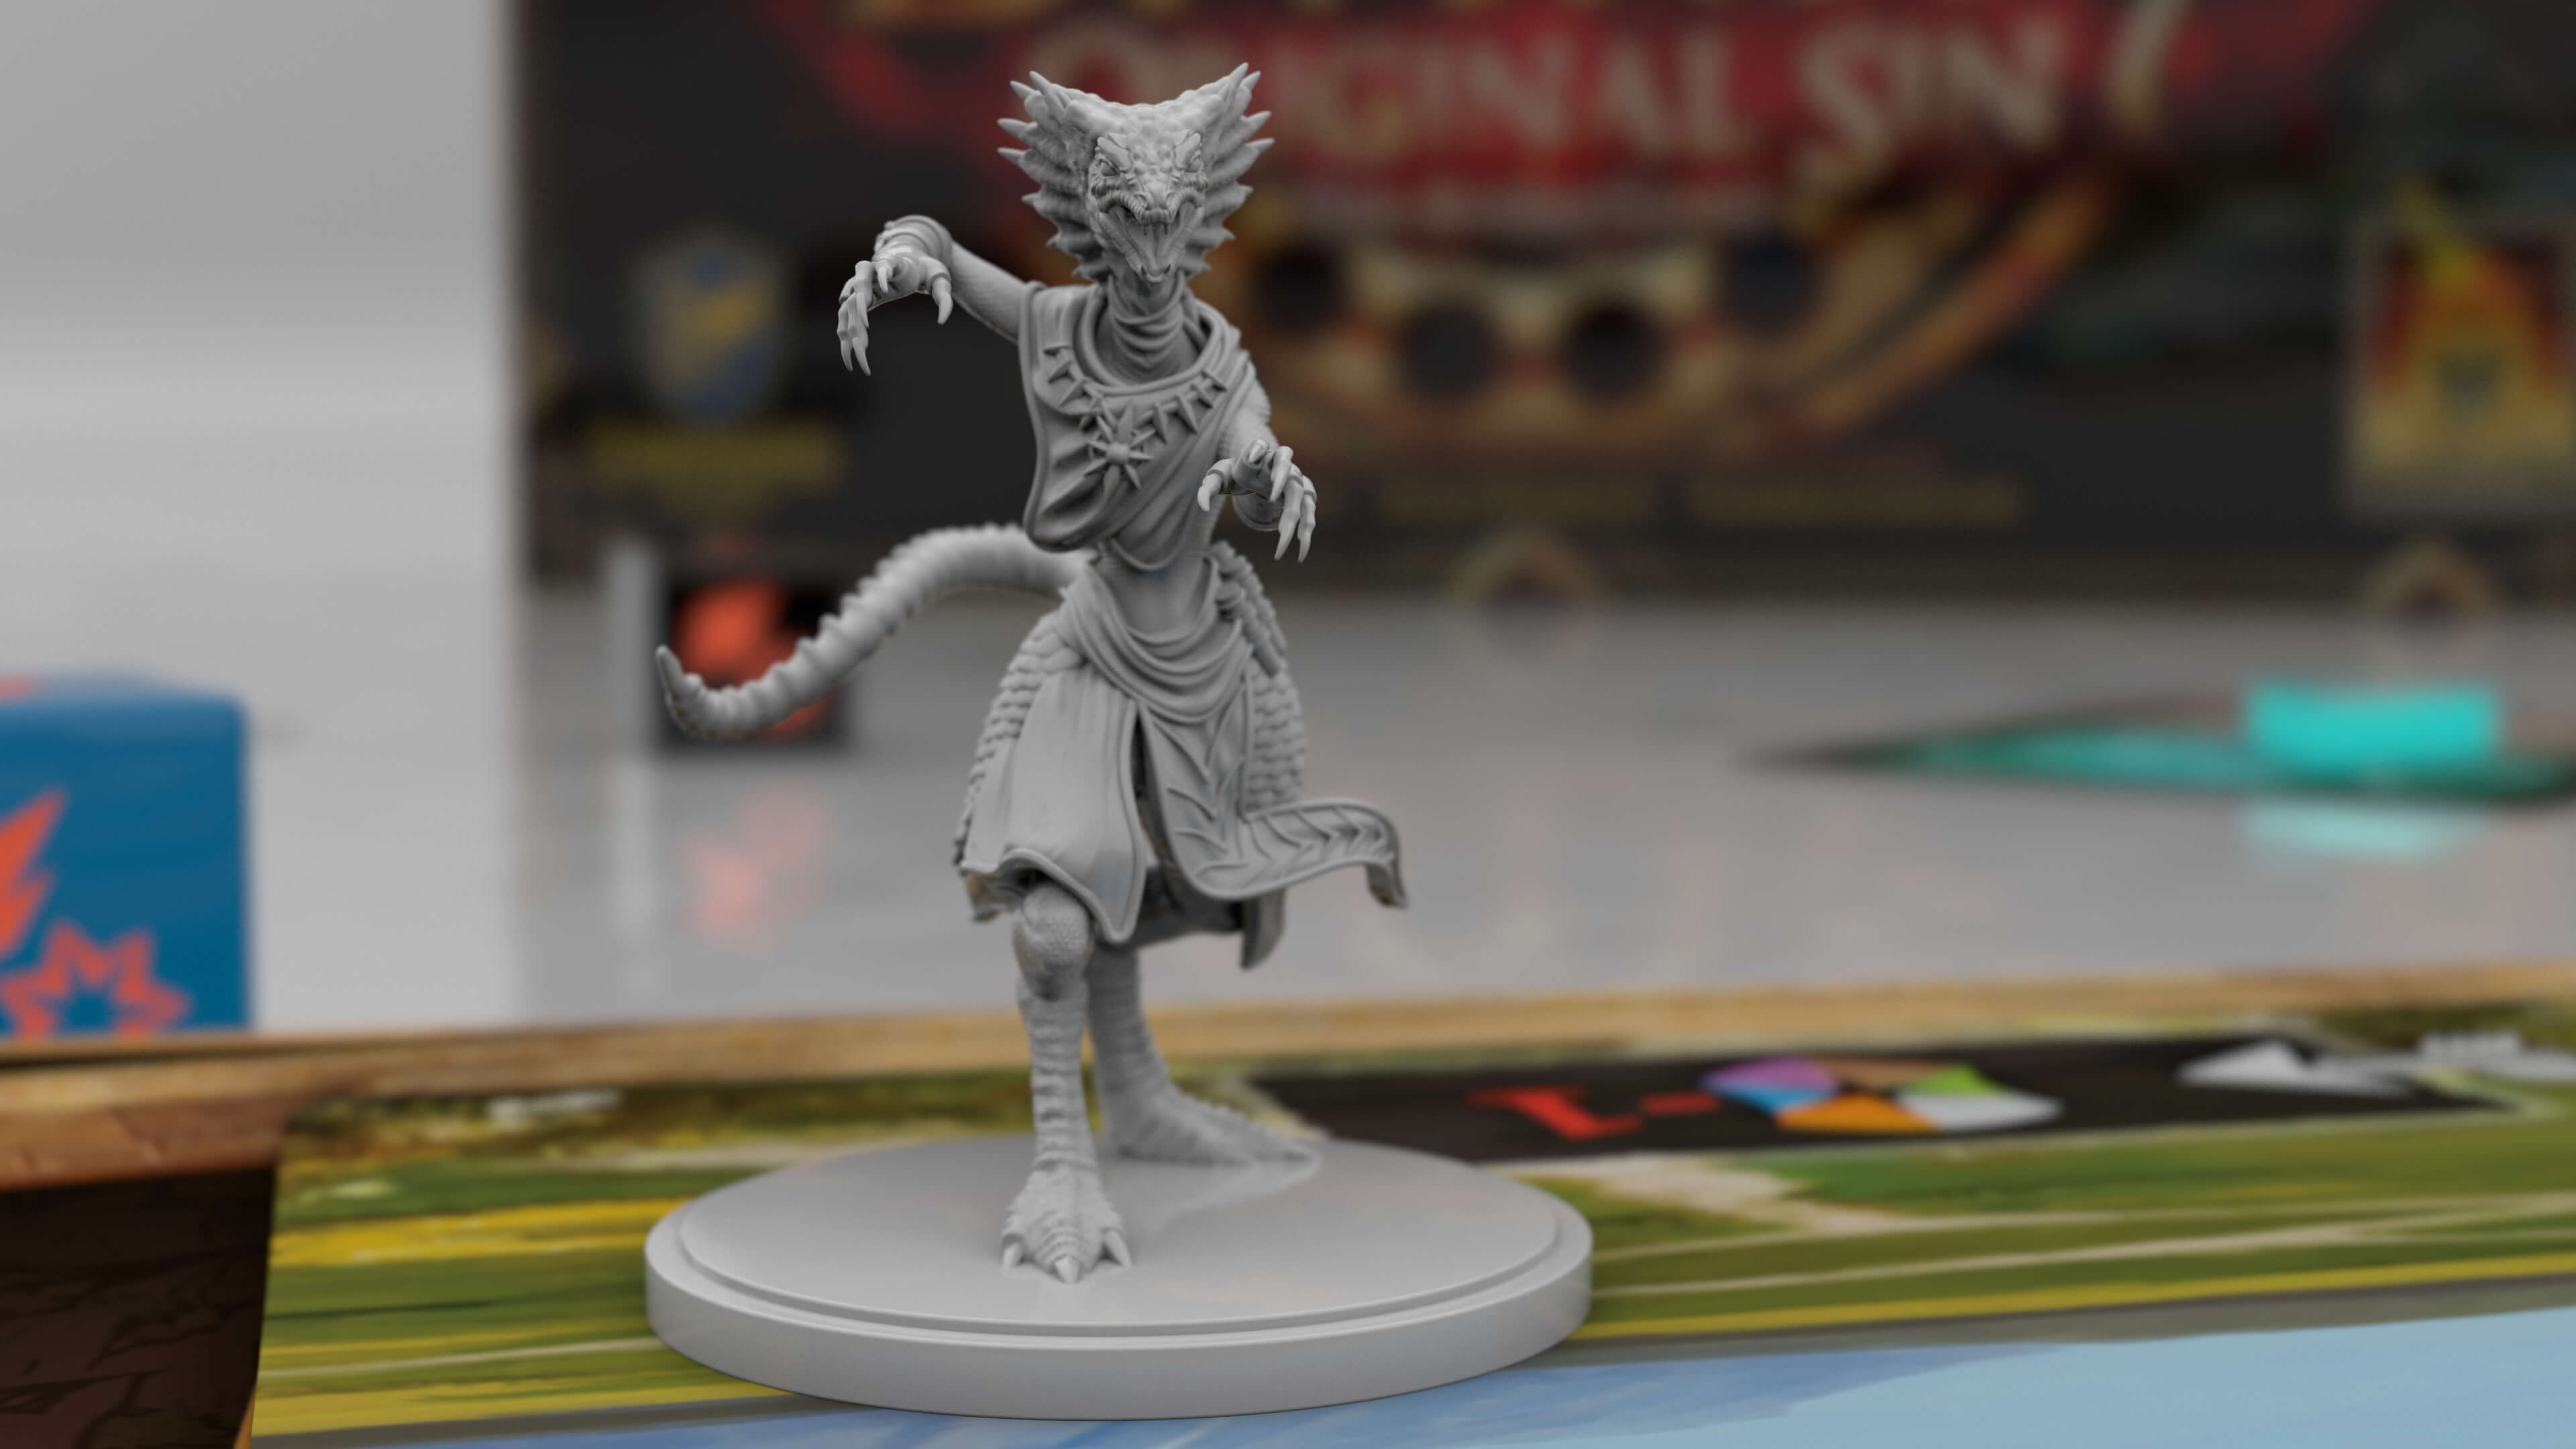 One of the playable characters from the Divinity Original Sin Board Game